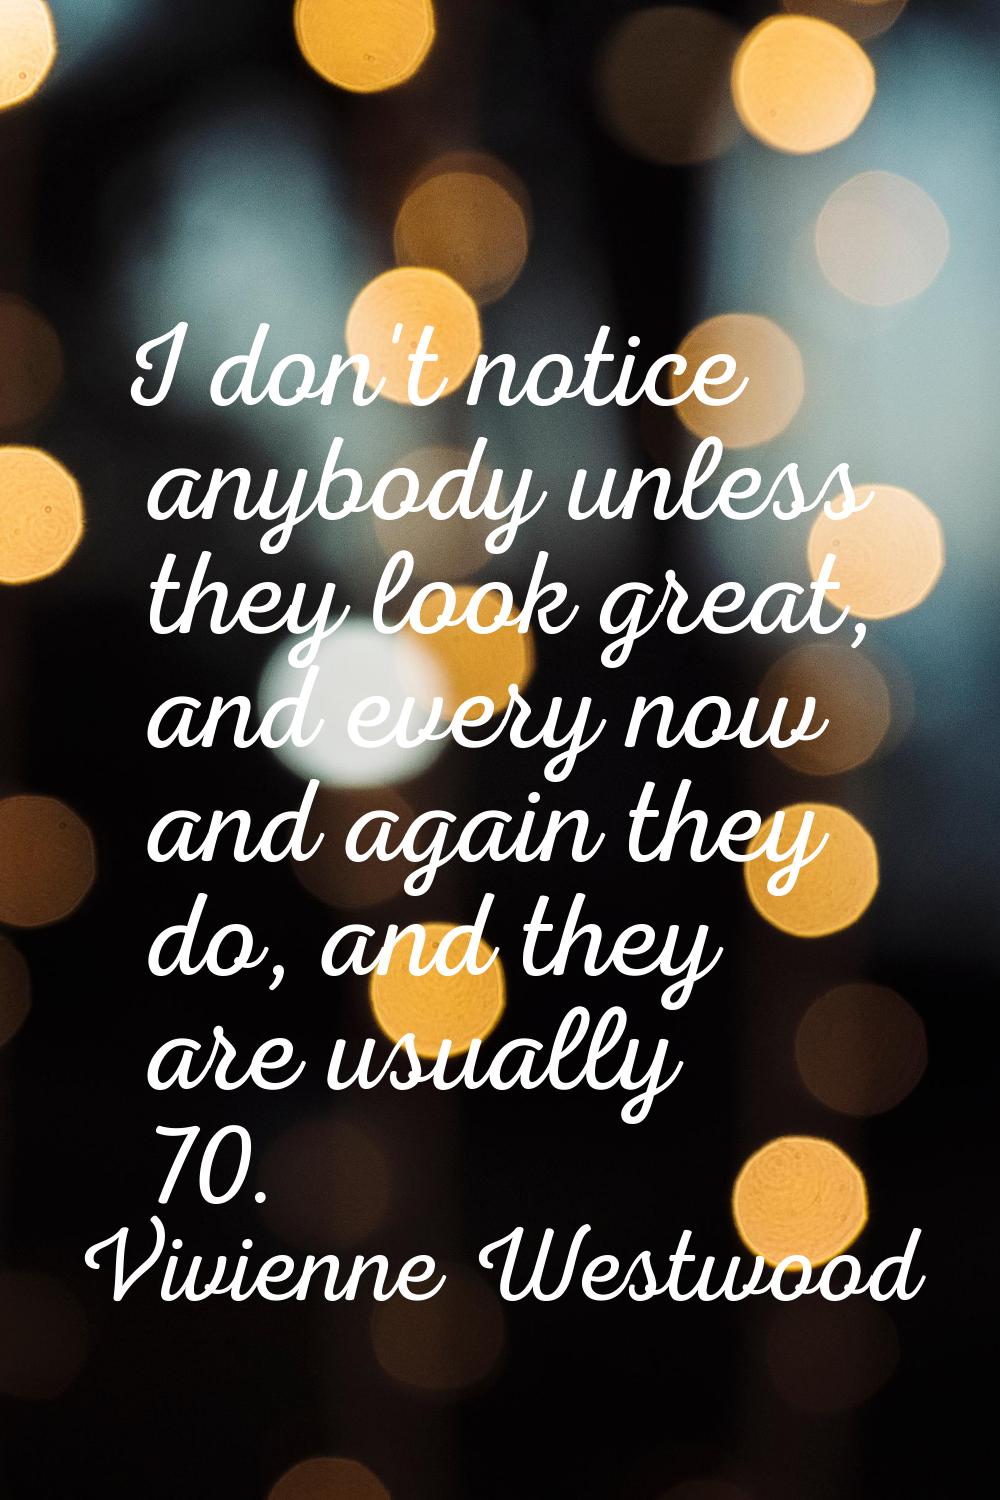 I don't notice anybody unless they look great, and every now and again they do, and they are usuall